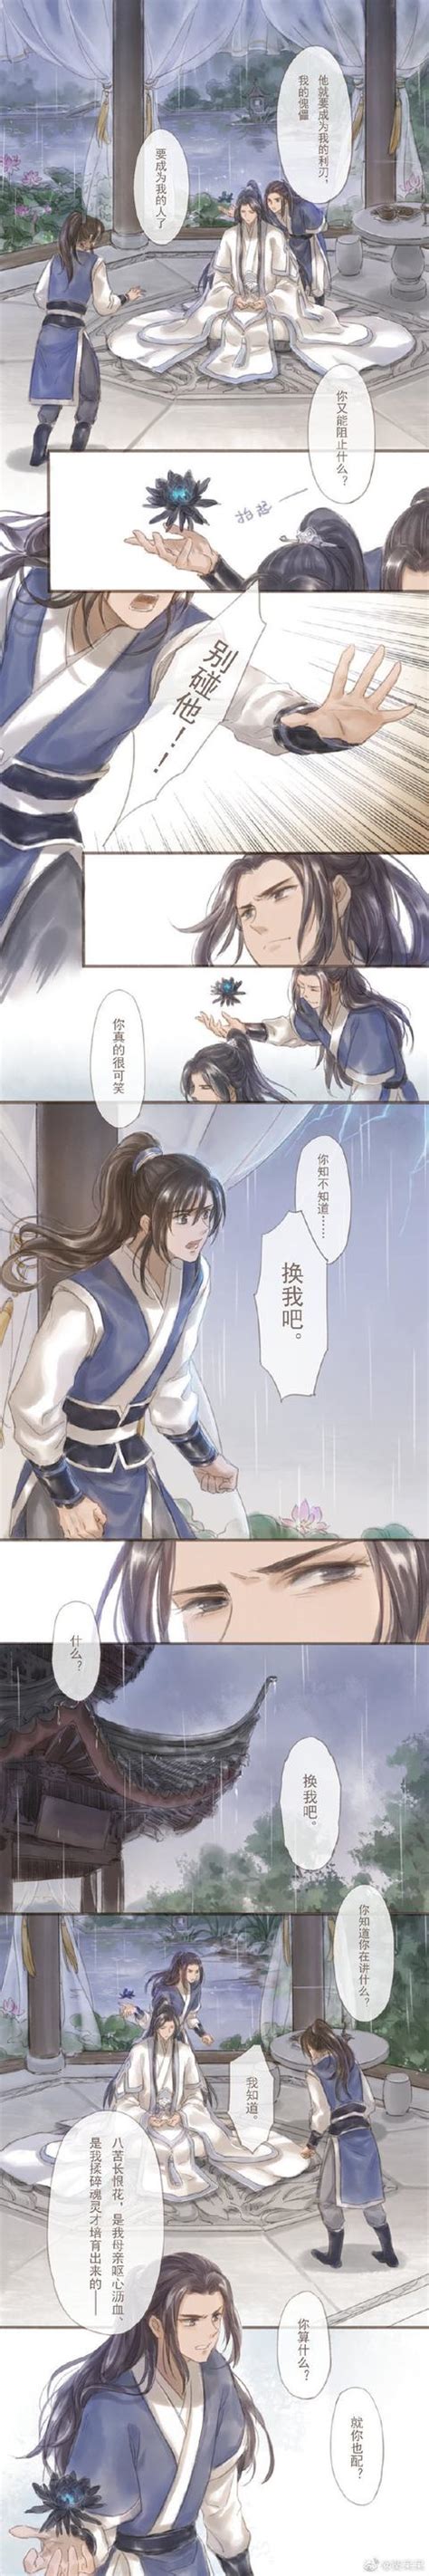 Discover more posts about 二哈和他的白猫师尊. 二哈和他的白猫师尊漫画，看完不要哭_蔡呆呆